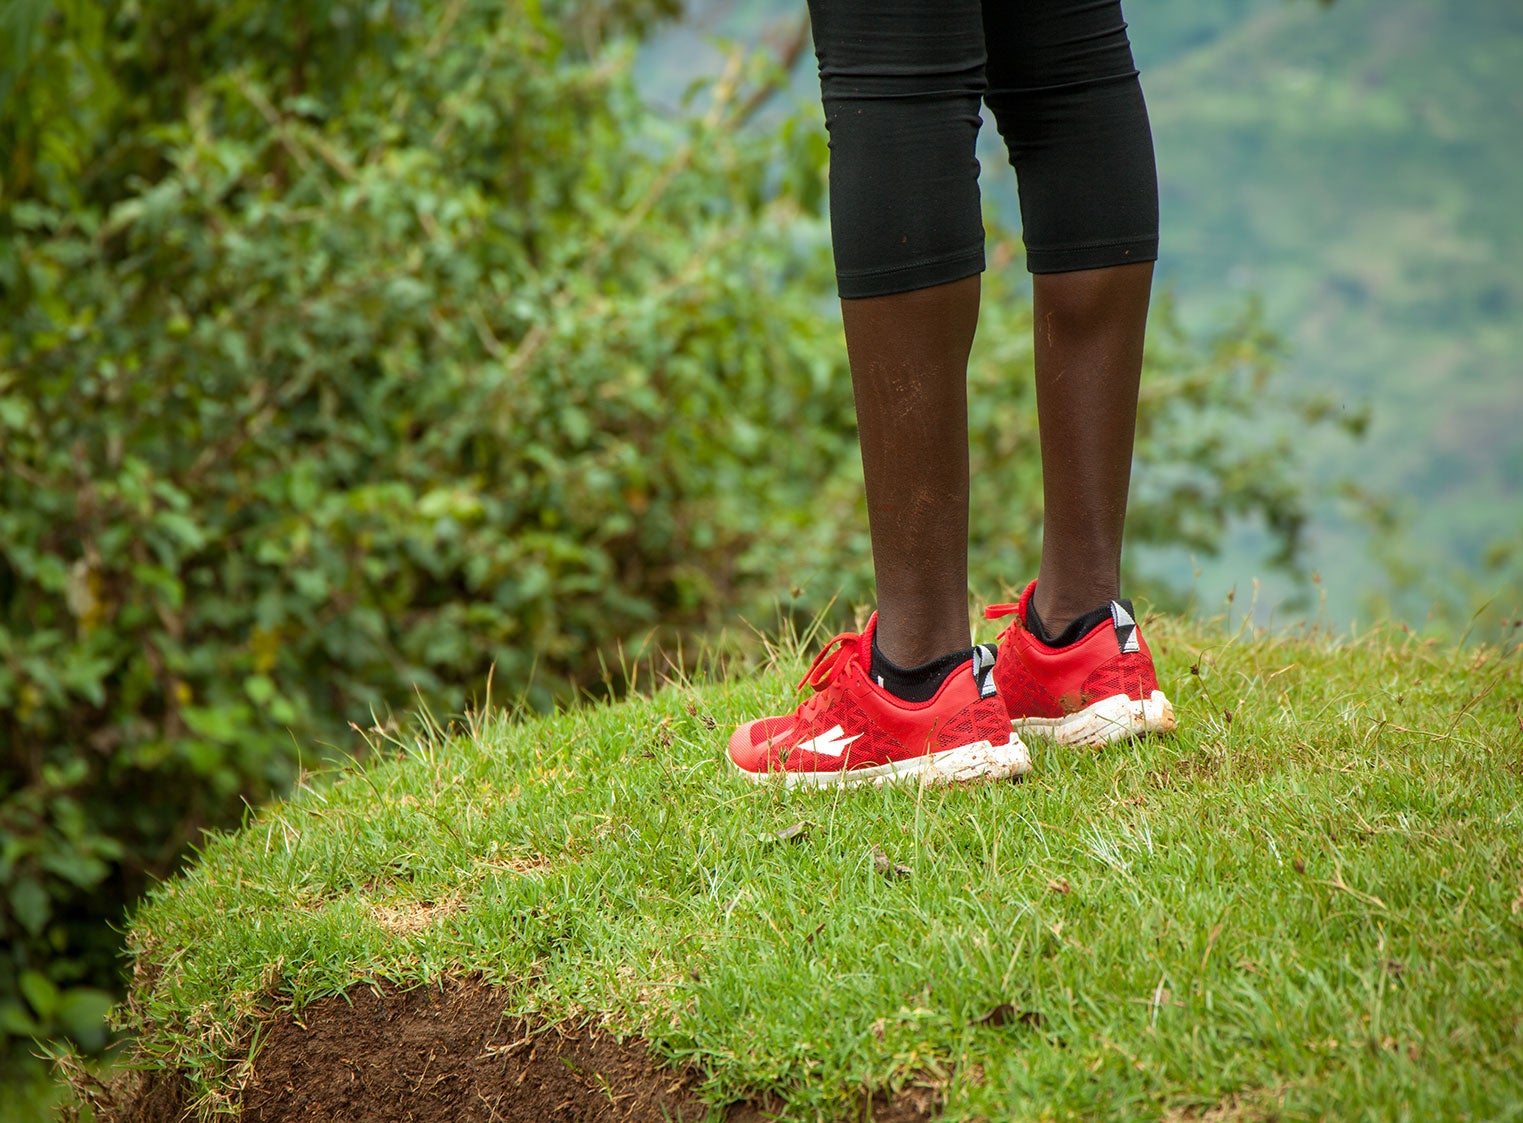 Kenyan Woman on Track to Create Country's First Running Shoe
